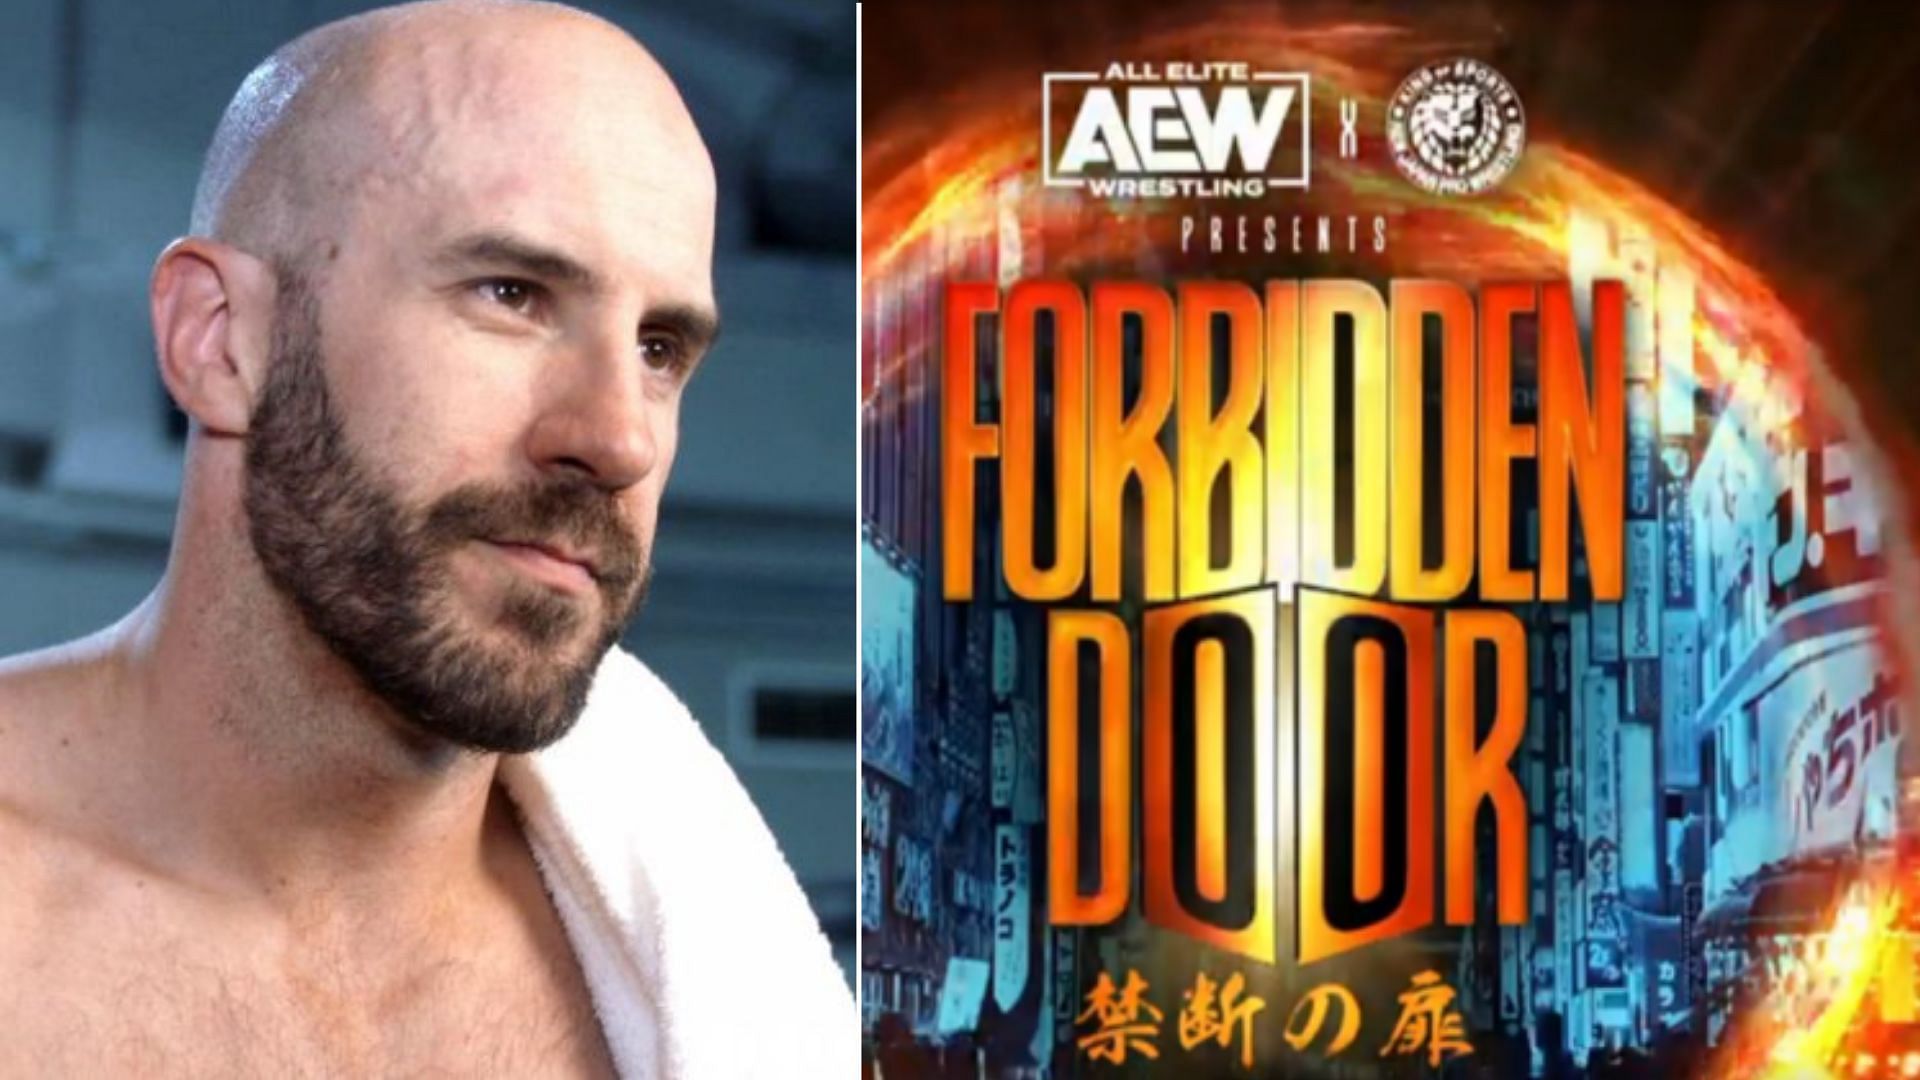 Could Cesaro make an appearance at Forbidden Door?